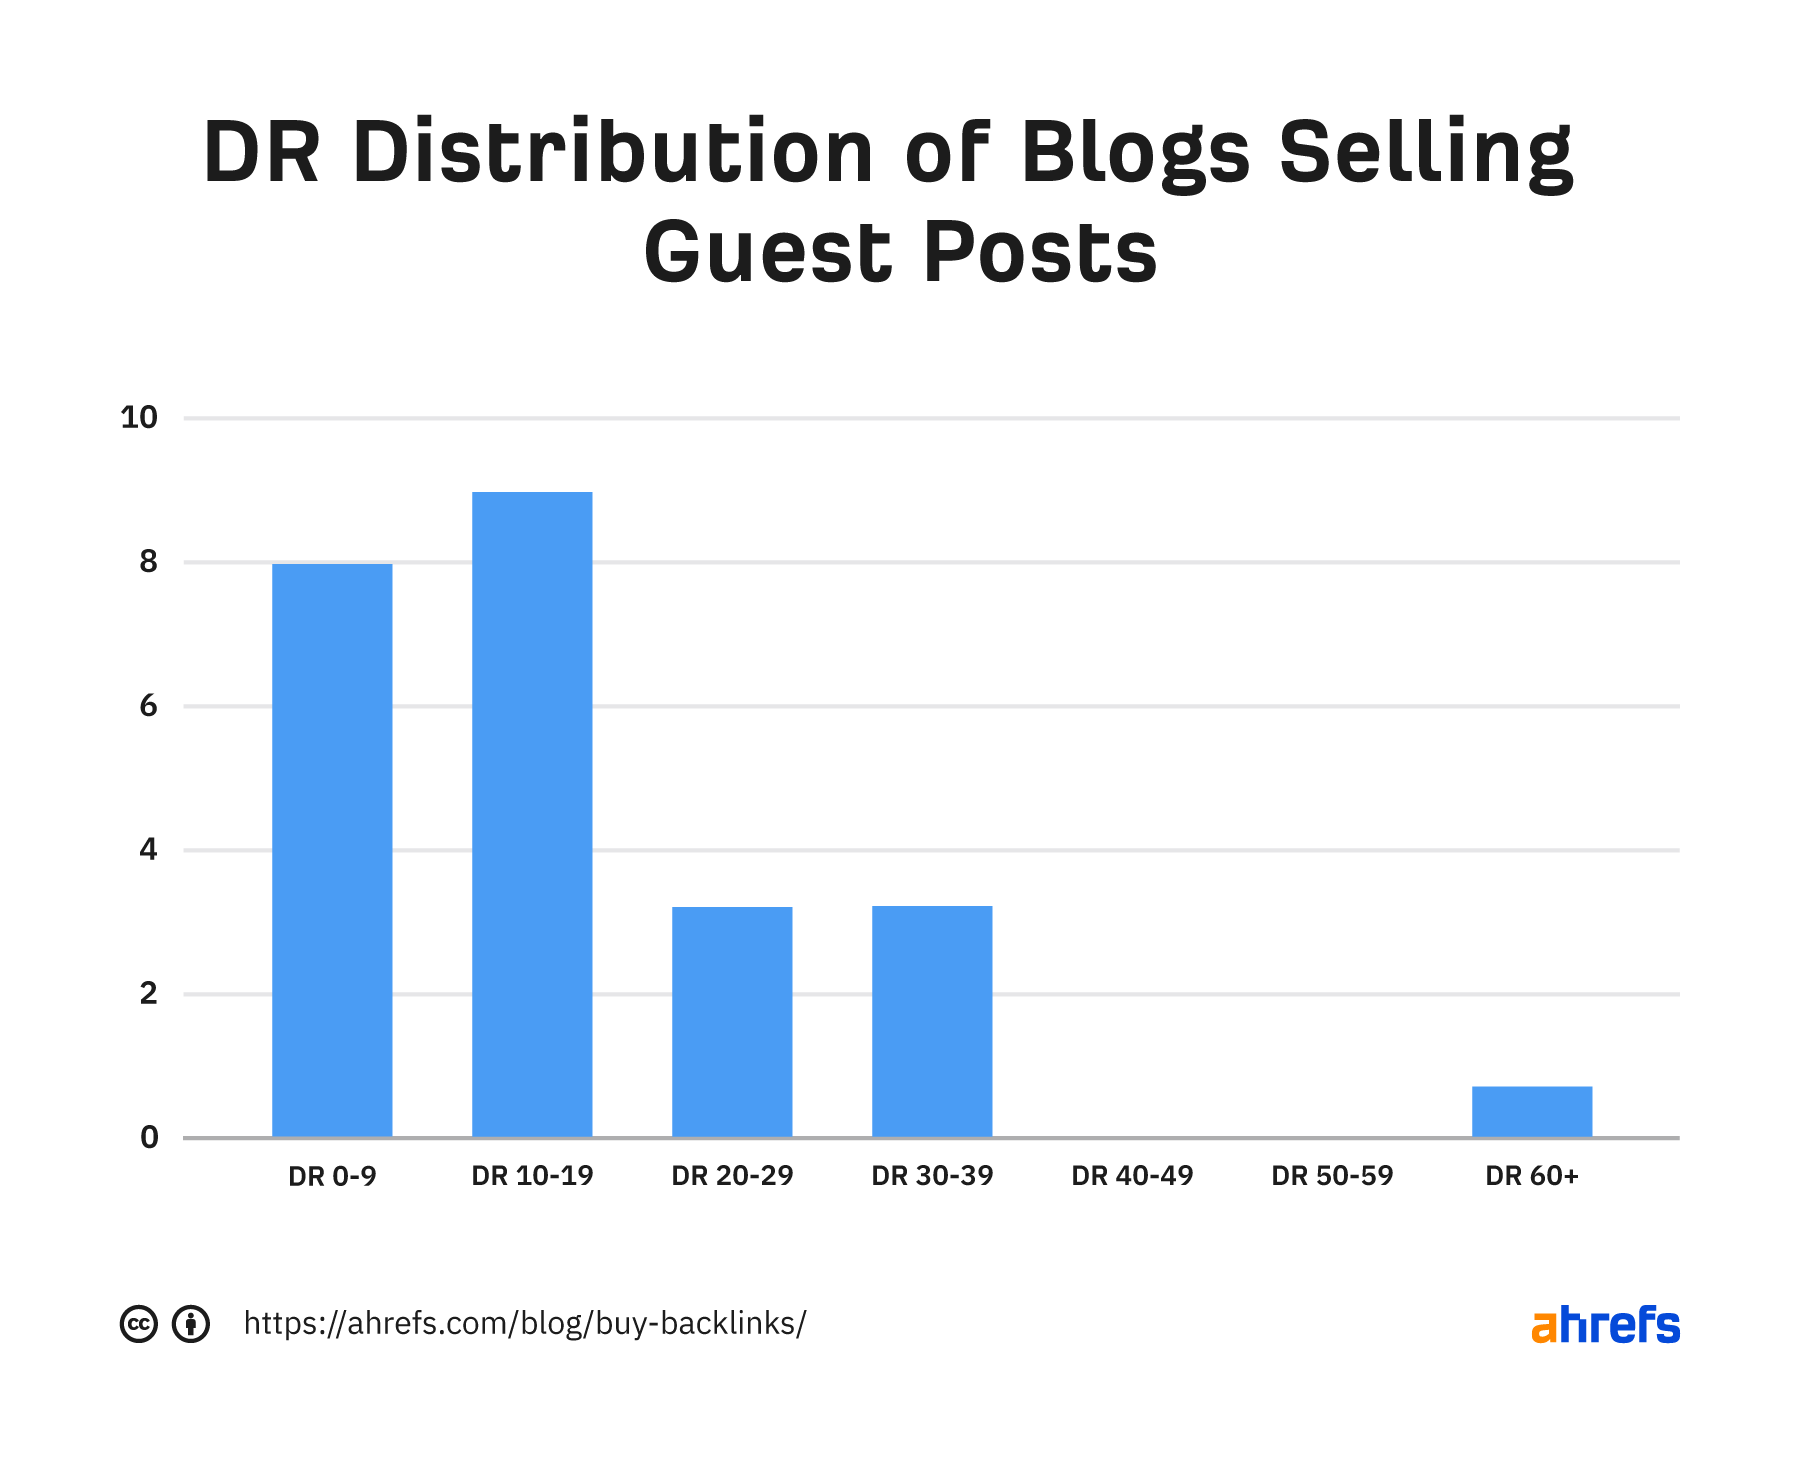 DR distribution of blogs selling guest posts